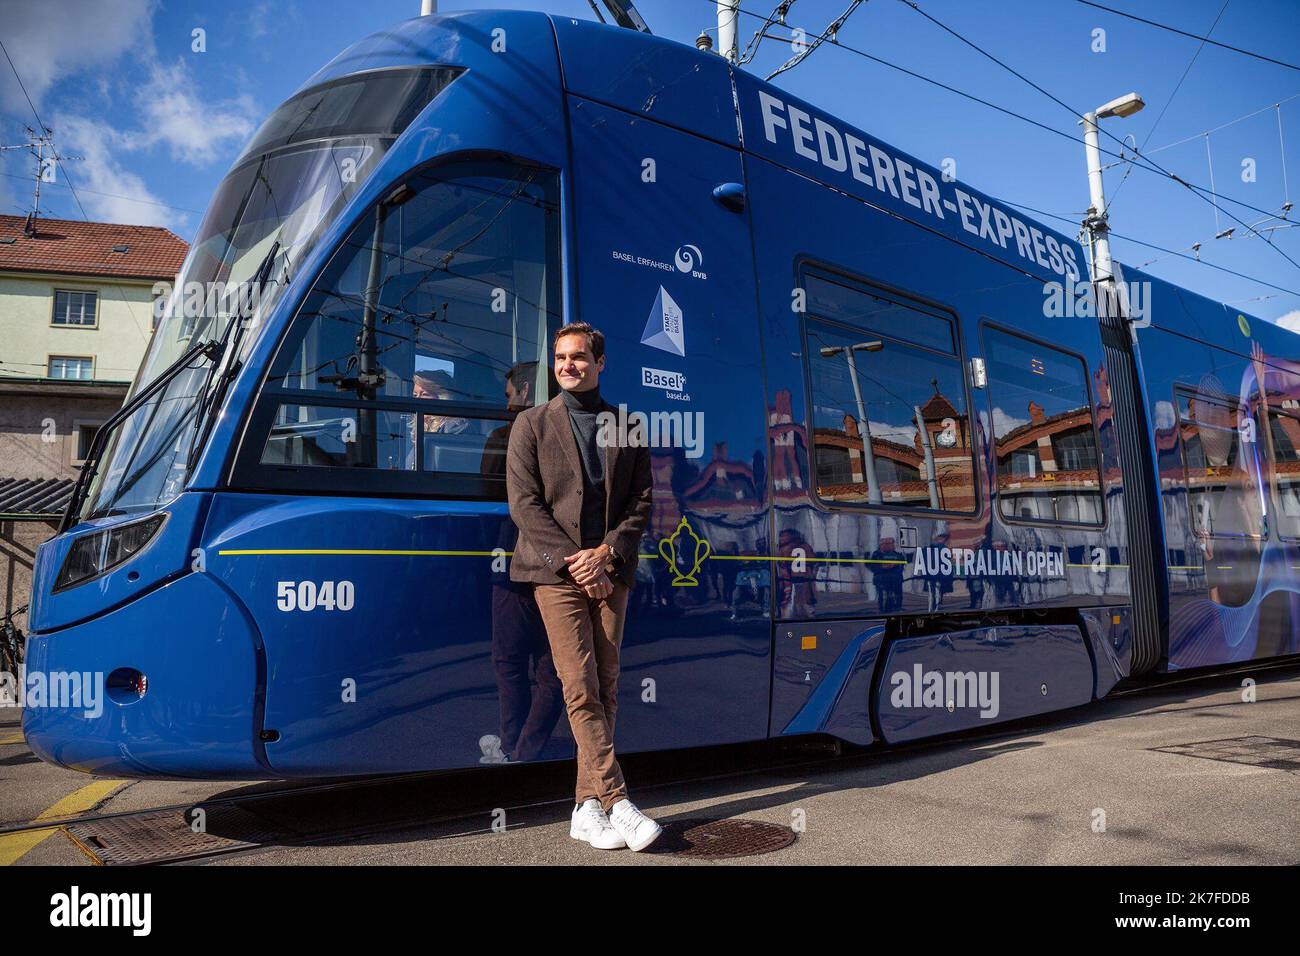 ©BVB-Francois Glories/MAXPPP - Roger now has a tram in his honour, the "Federer Express". Tennis champion Roger Federer now has a tram that pays tribute to him. The Basel public transport company inaugurated a tram decorated with photos of the tennis player's achievements on Friday. Roger Federer himself was present to celebrate the launch of tram number 5040 in the city of Basel. Stock Photo